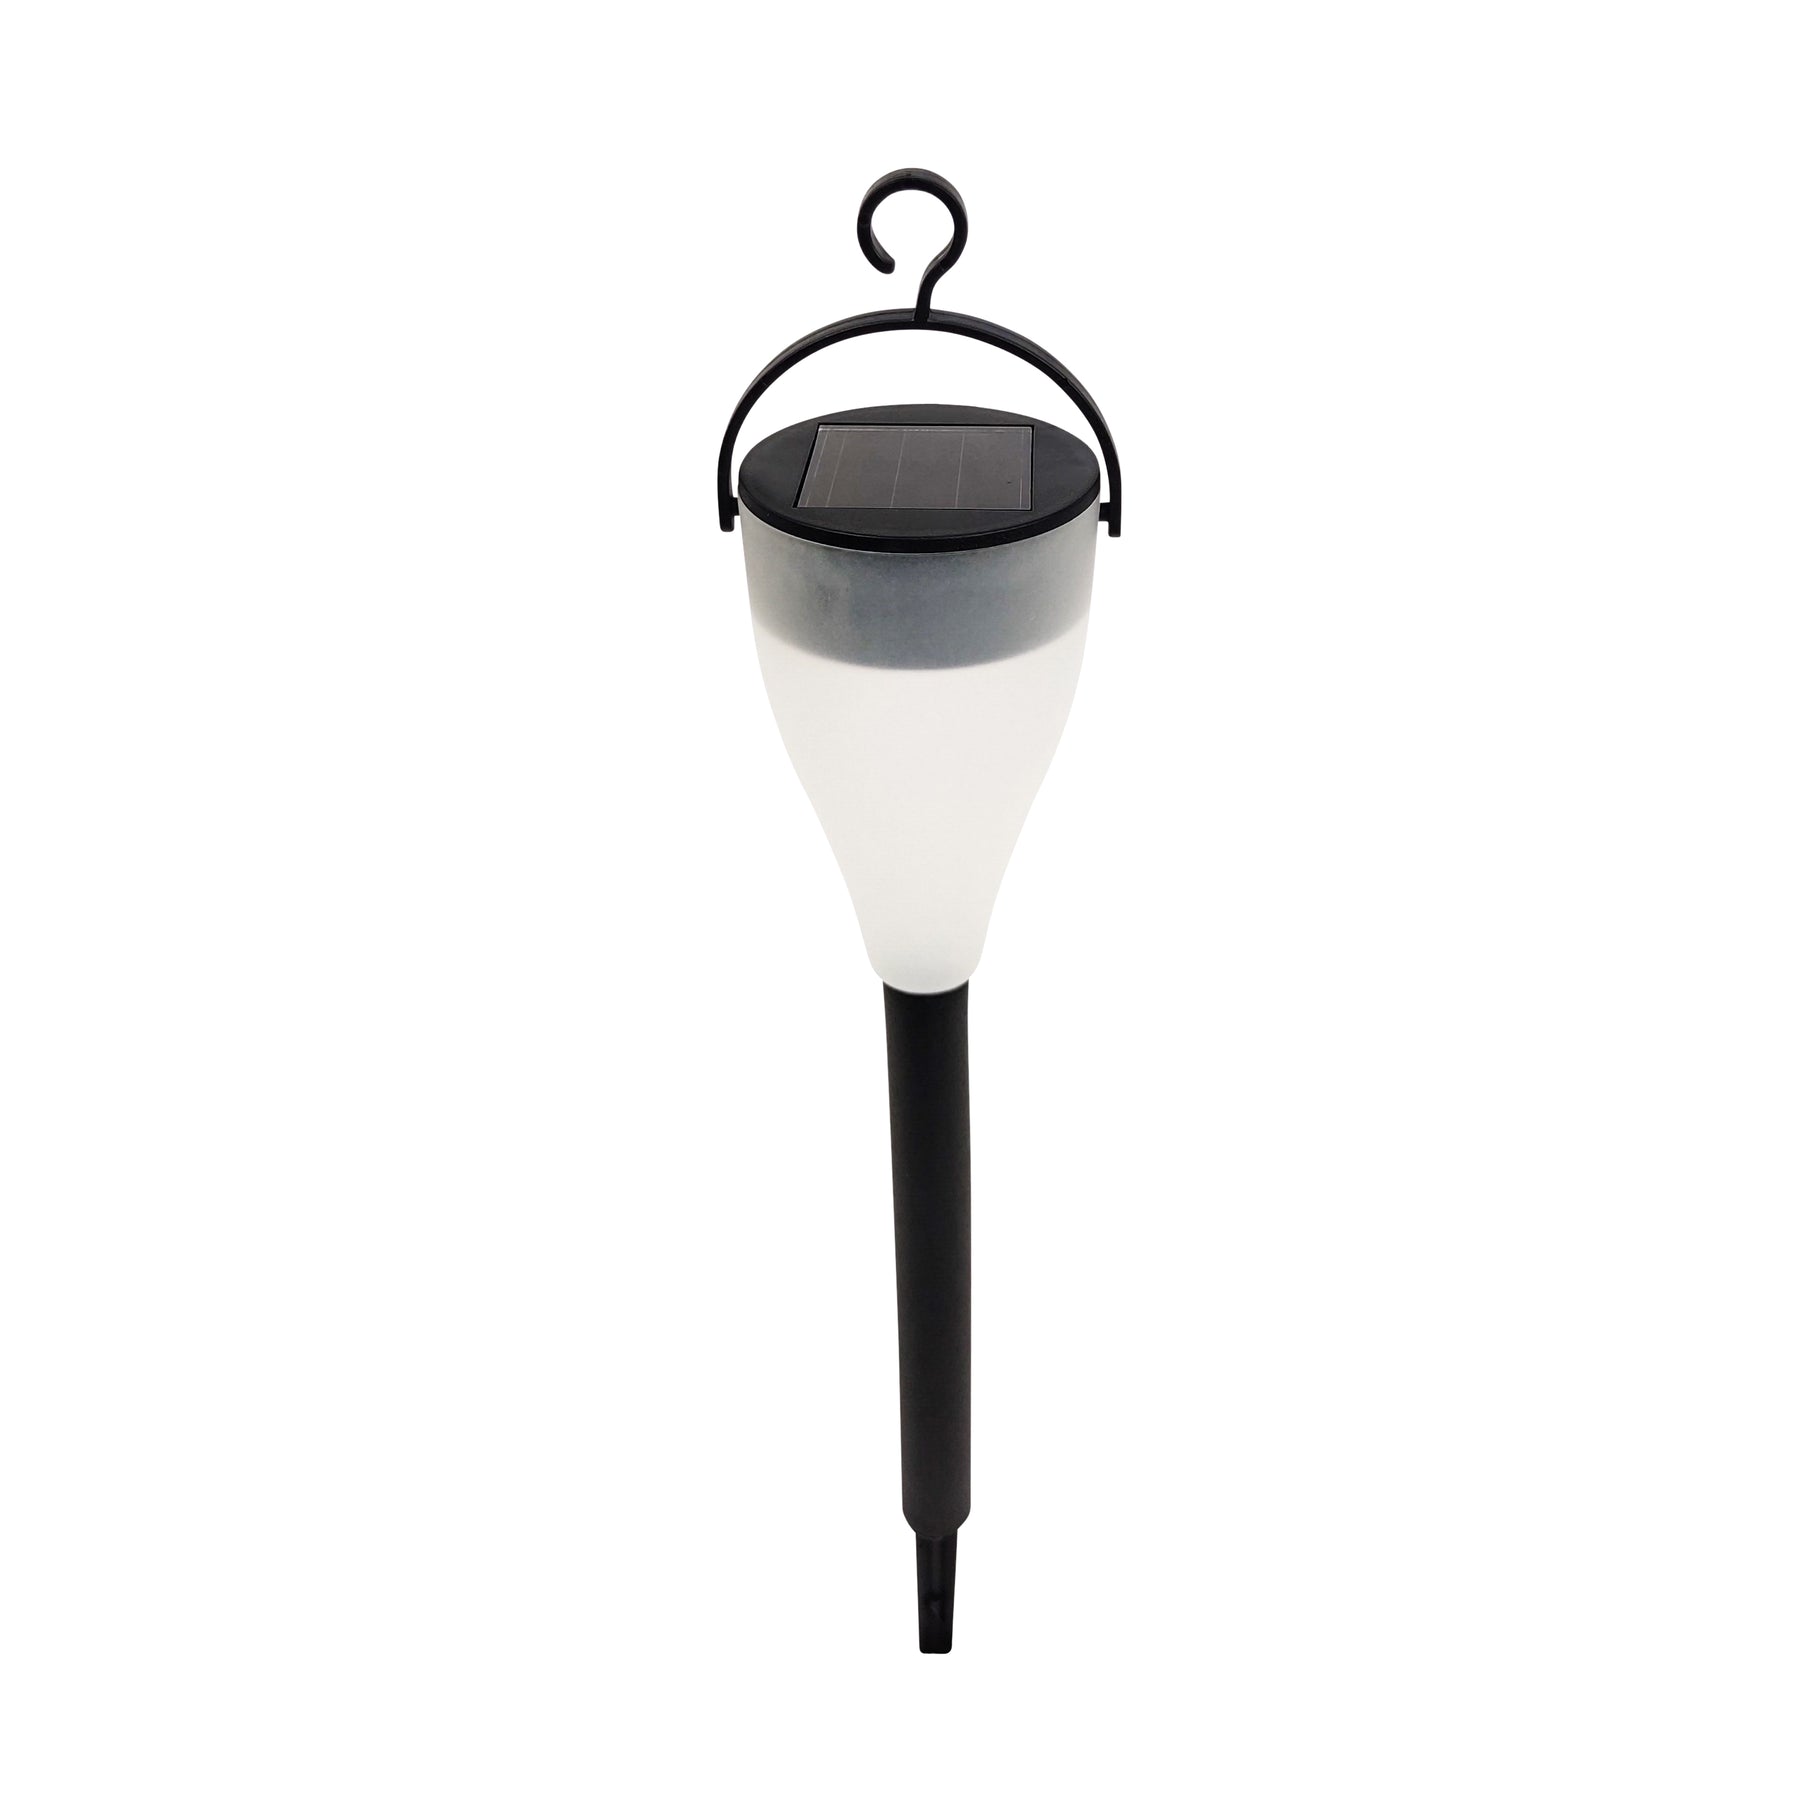 Top-angled view of the Bliss Outdoors 14-inch Tall 6-Pack Solar Powered LED Pathway Light with a hanging hook showing the solar panel on top.